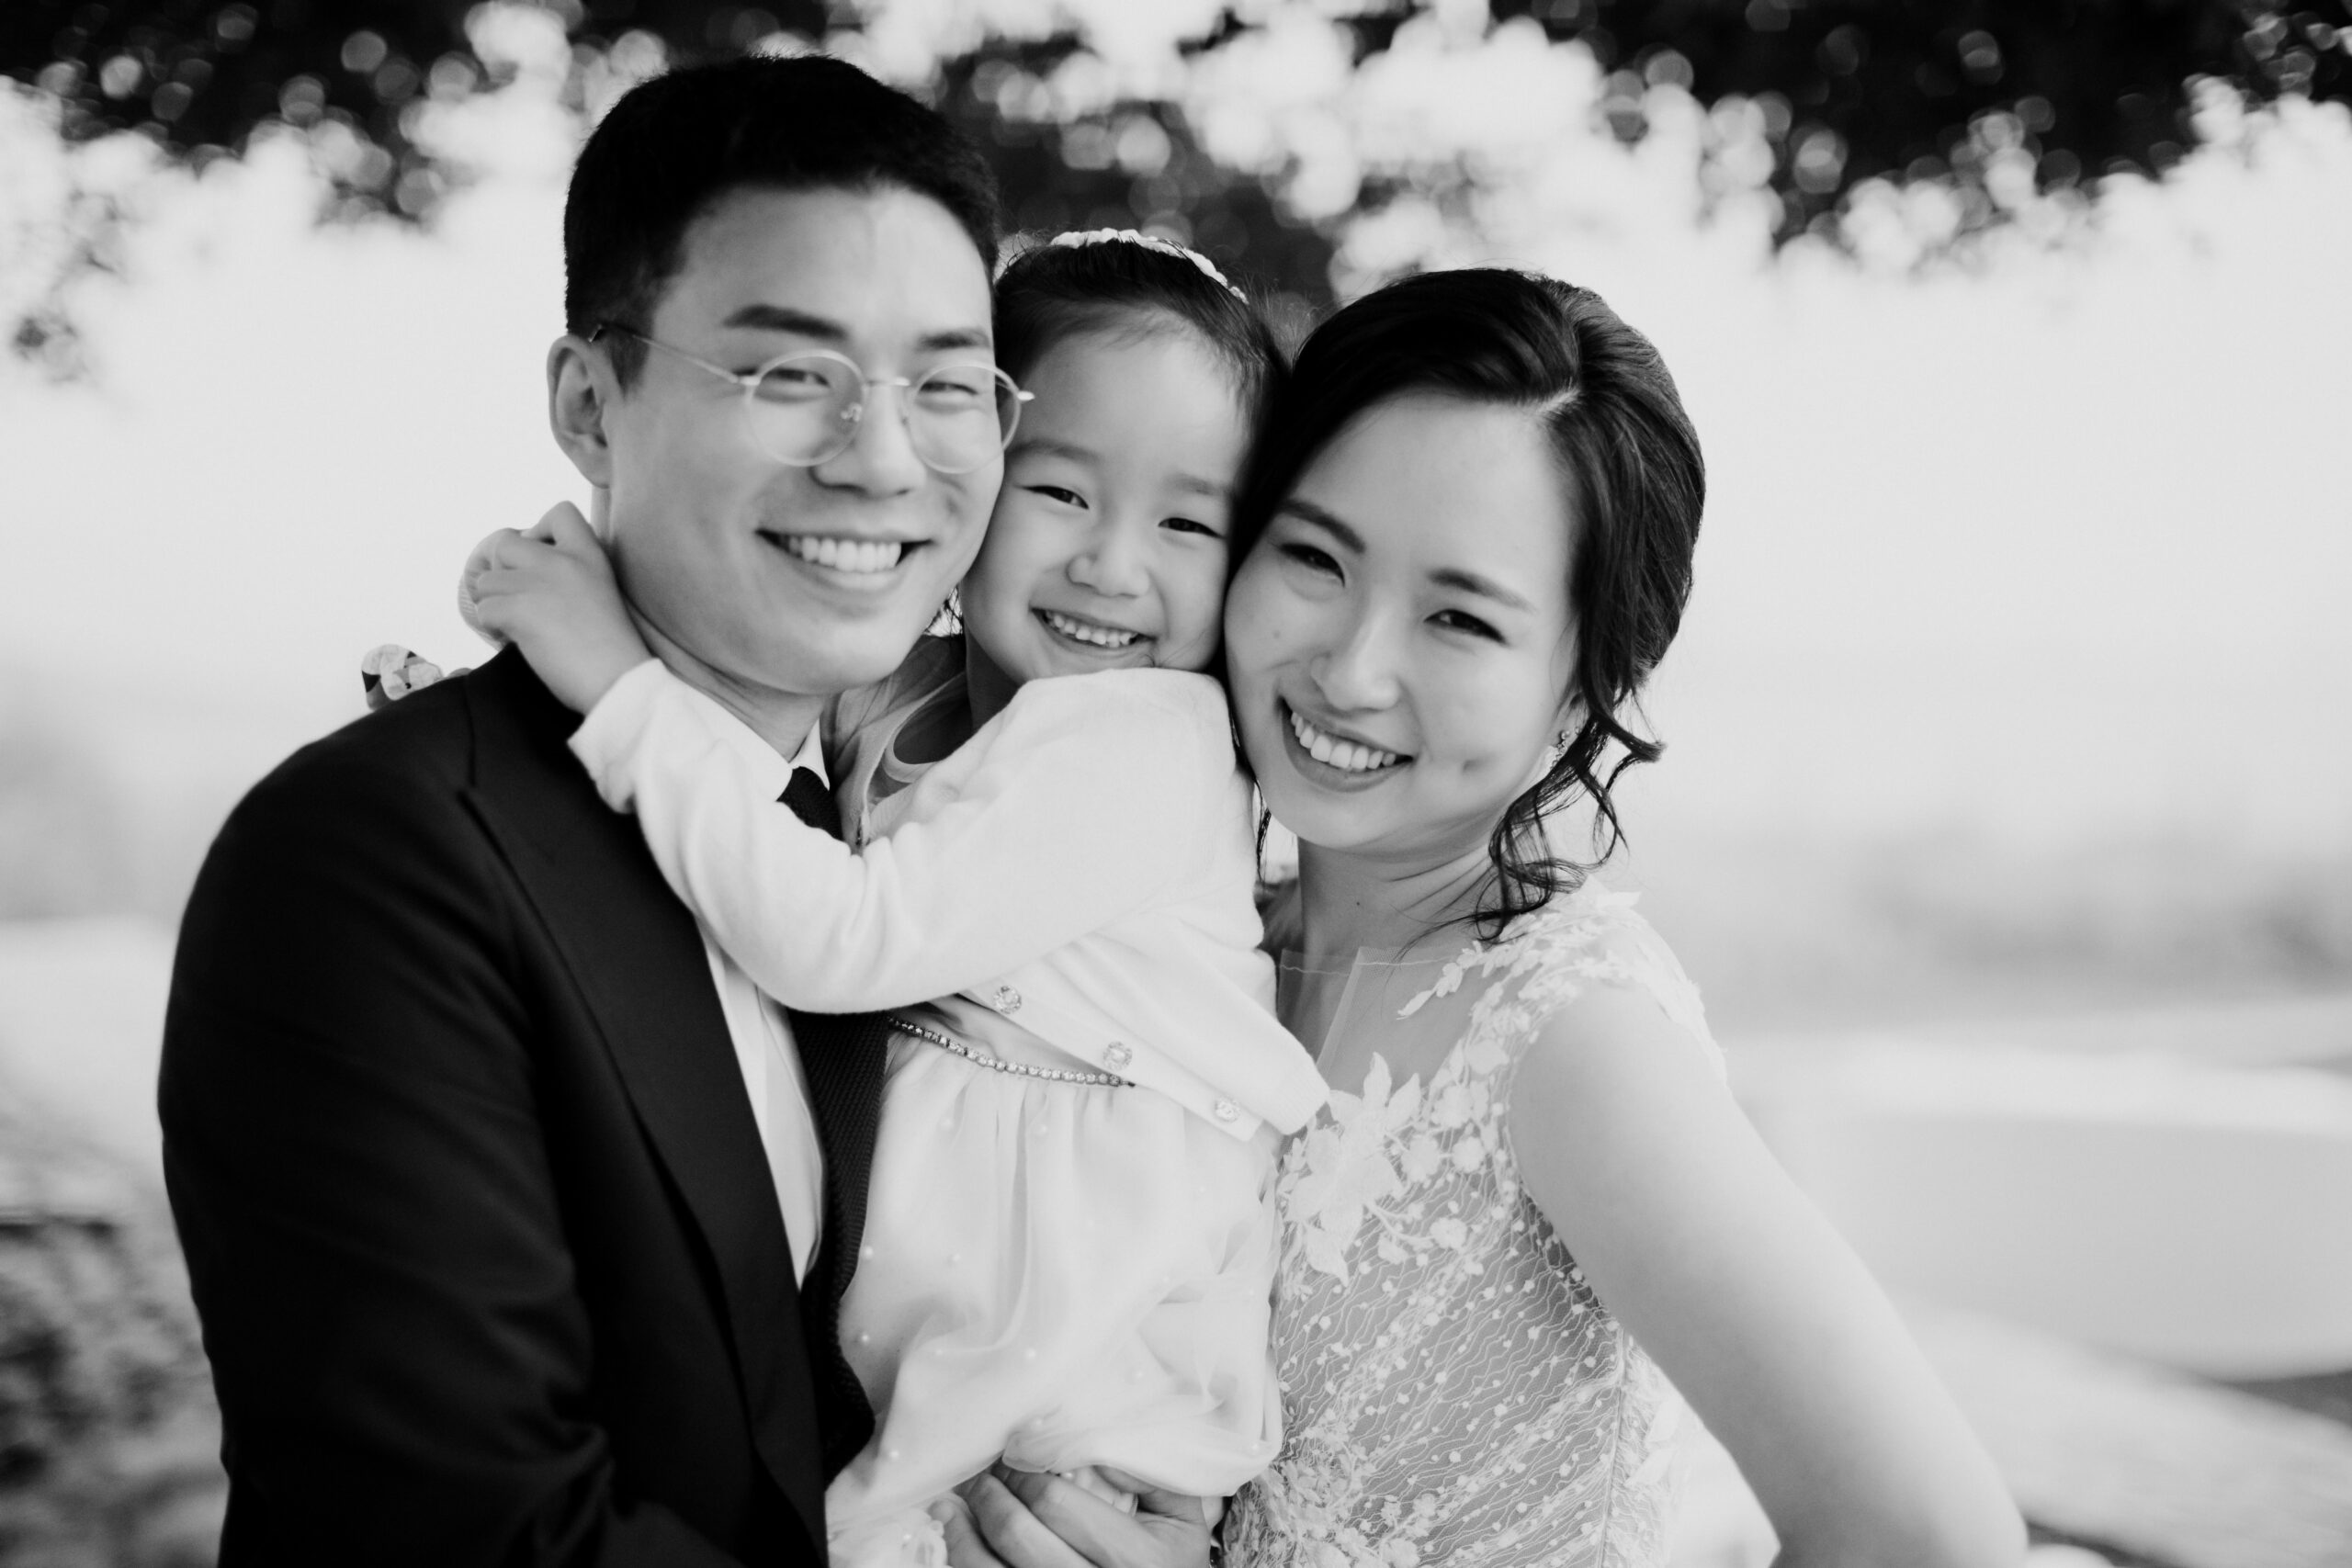 Stunning bride and groom pose with their flower girl after their Napa valley wedding day